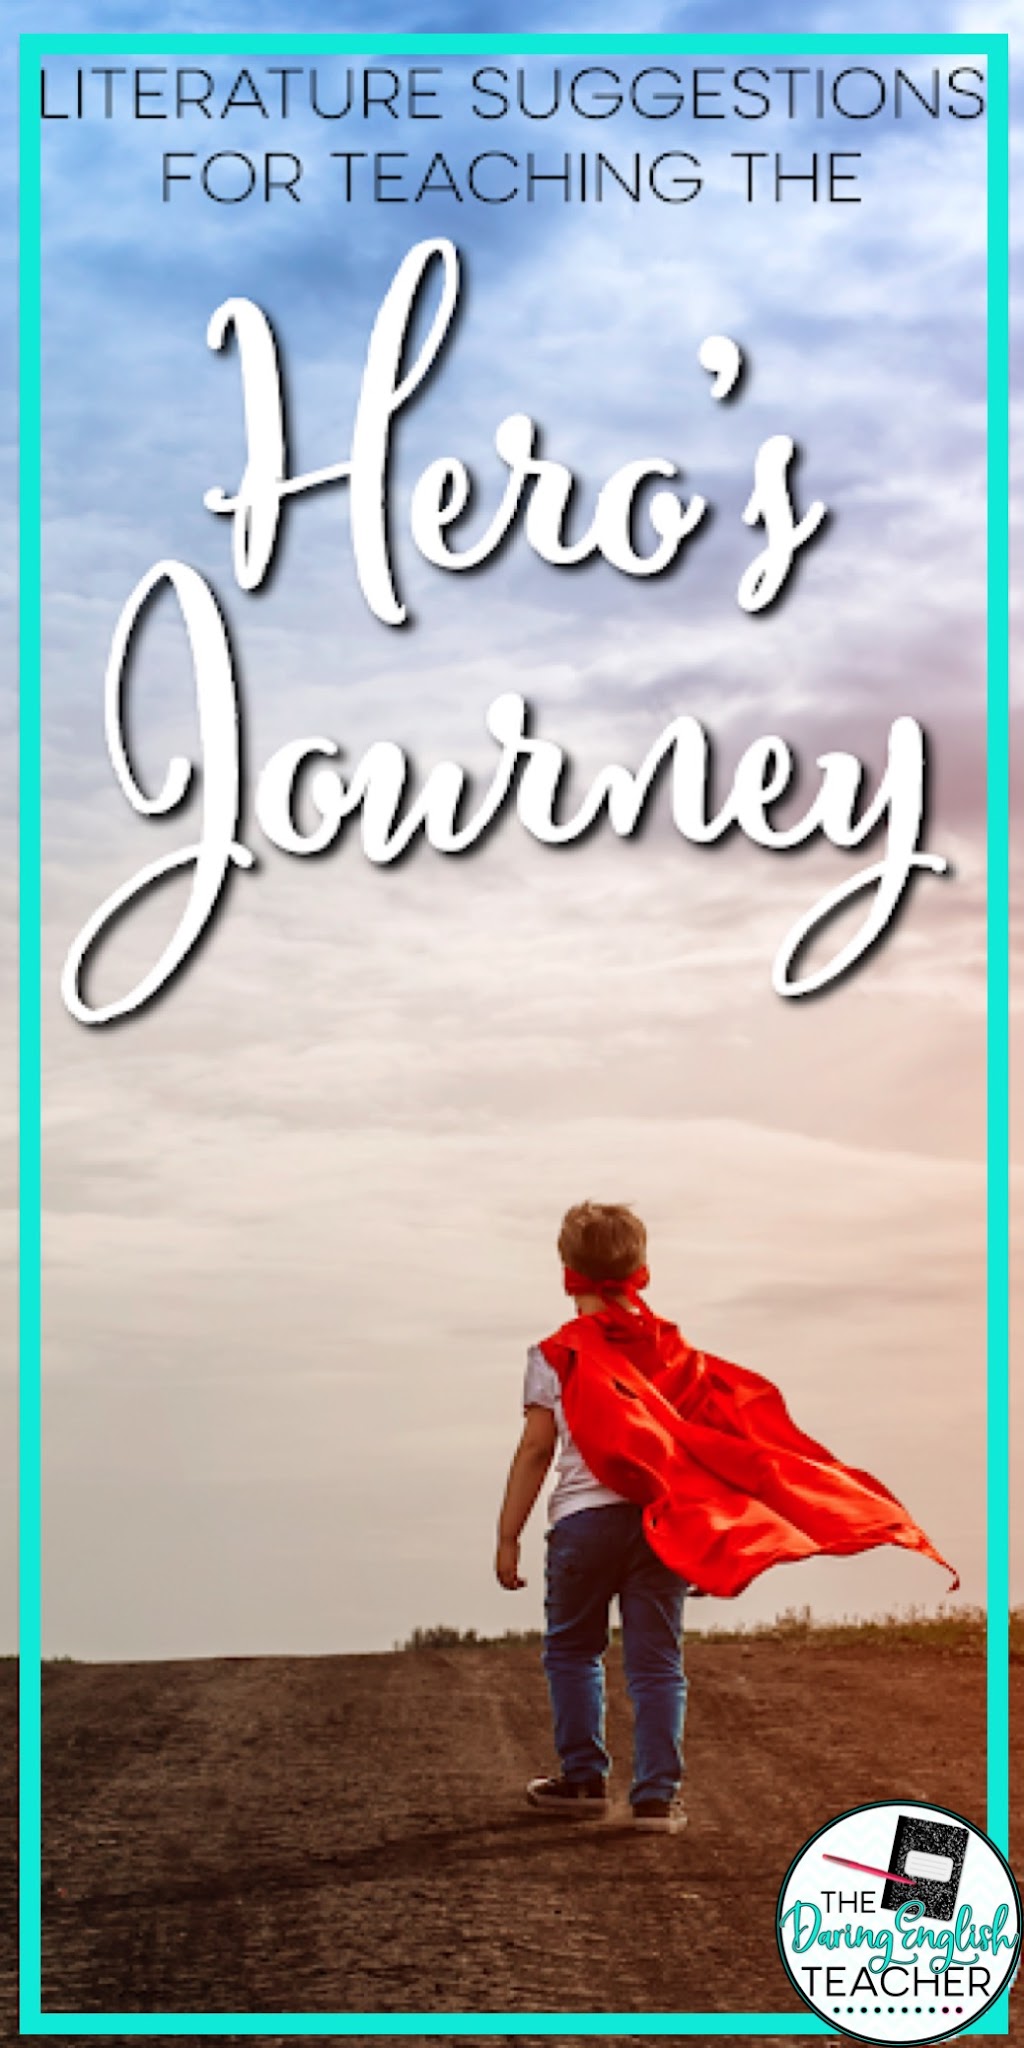 What to Read When Teaching the Hero's Journey